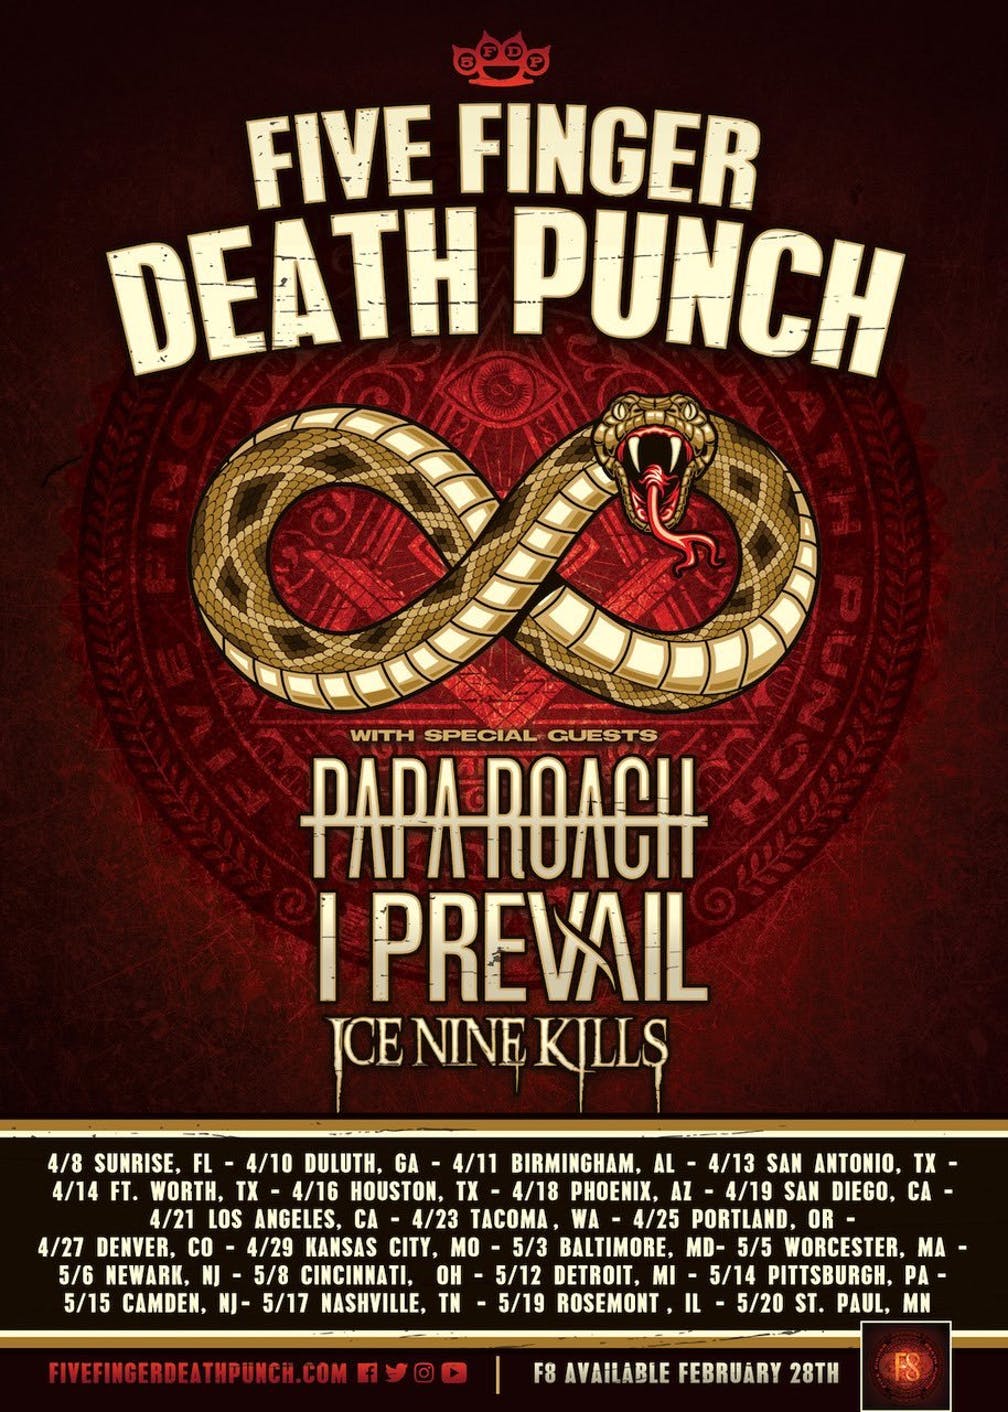 Five Finger Death Punch Have Announced A Tour With Papa Roach, I